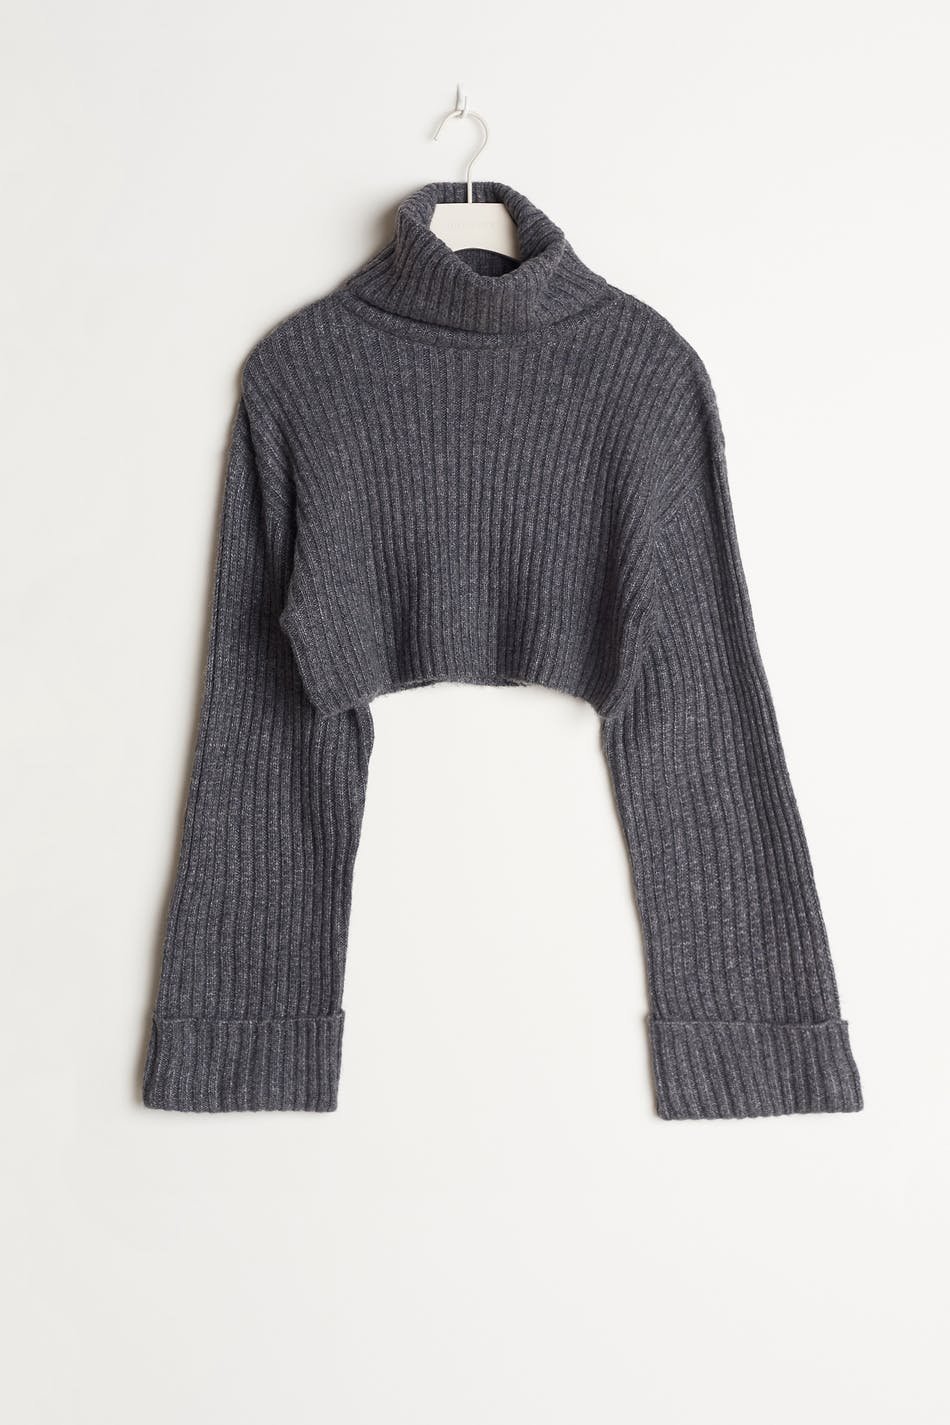 ginatricot.com | River knitted sweater